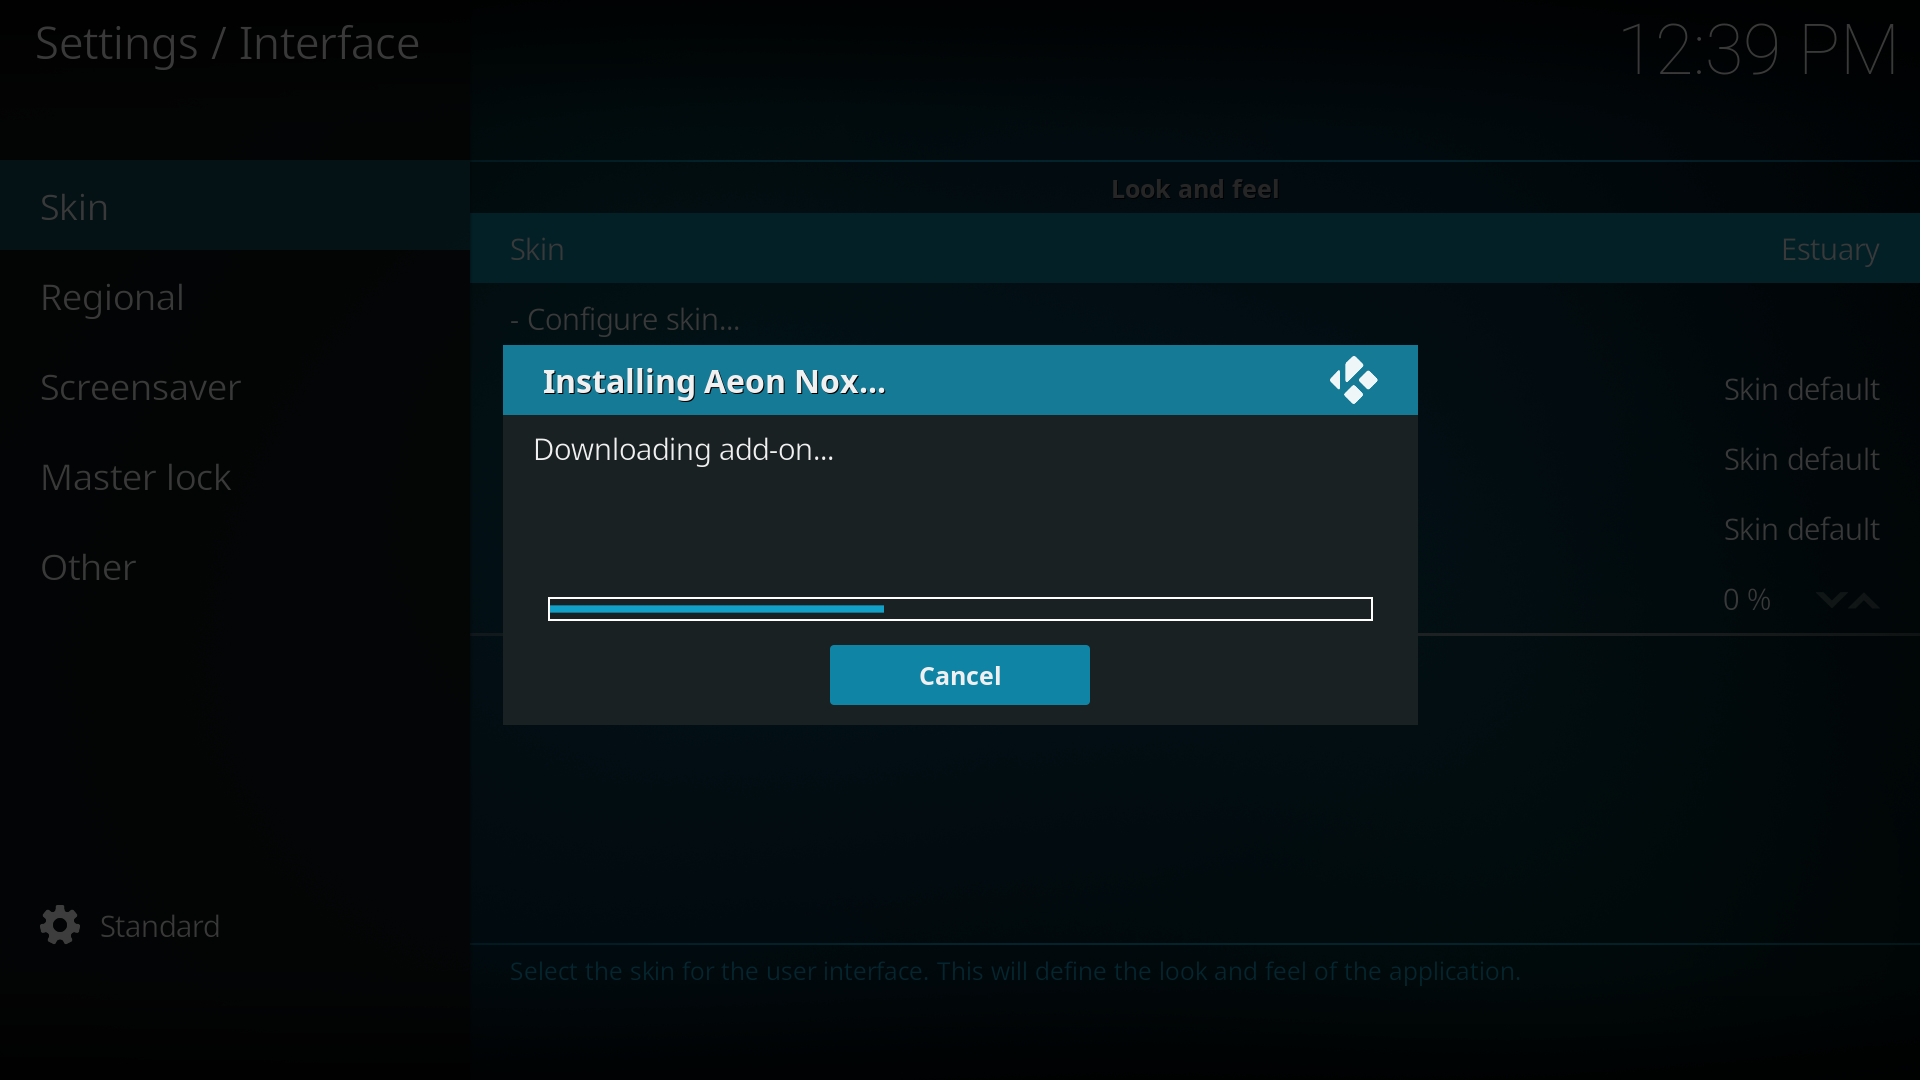 Step 7: After you have select the skin it will begin downloading and installing skin dependencies and the skin.